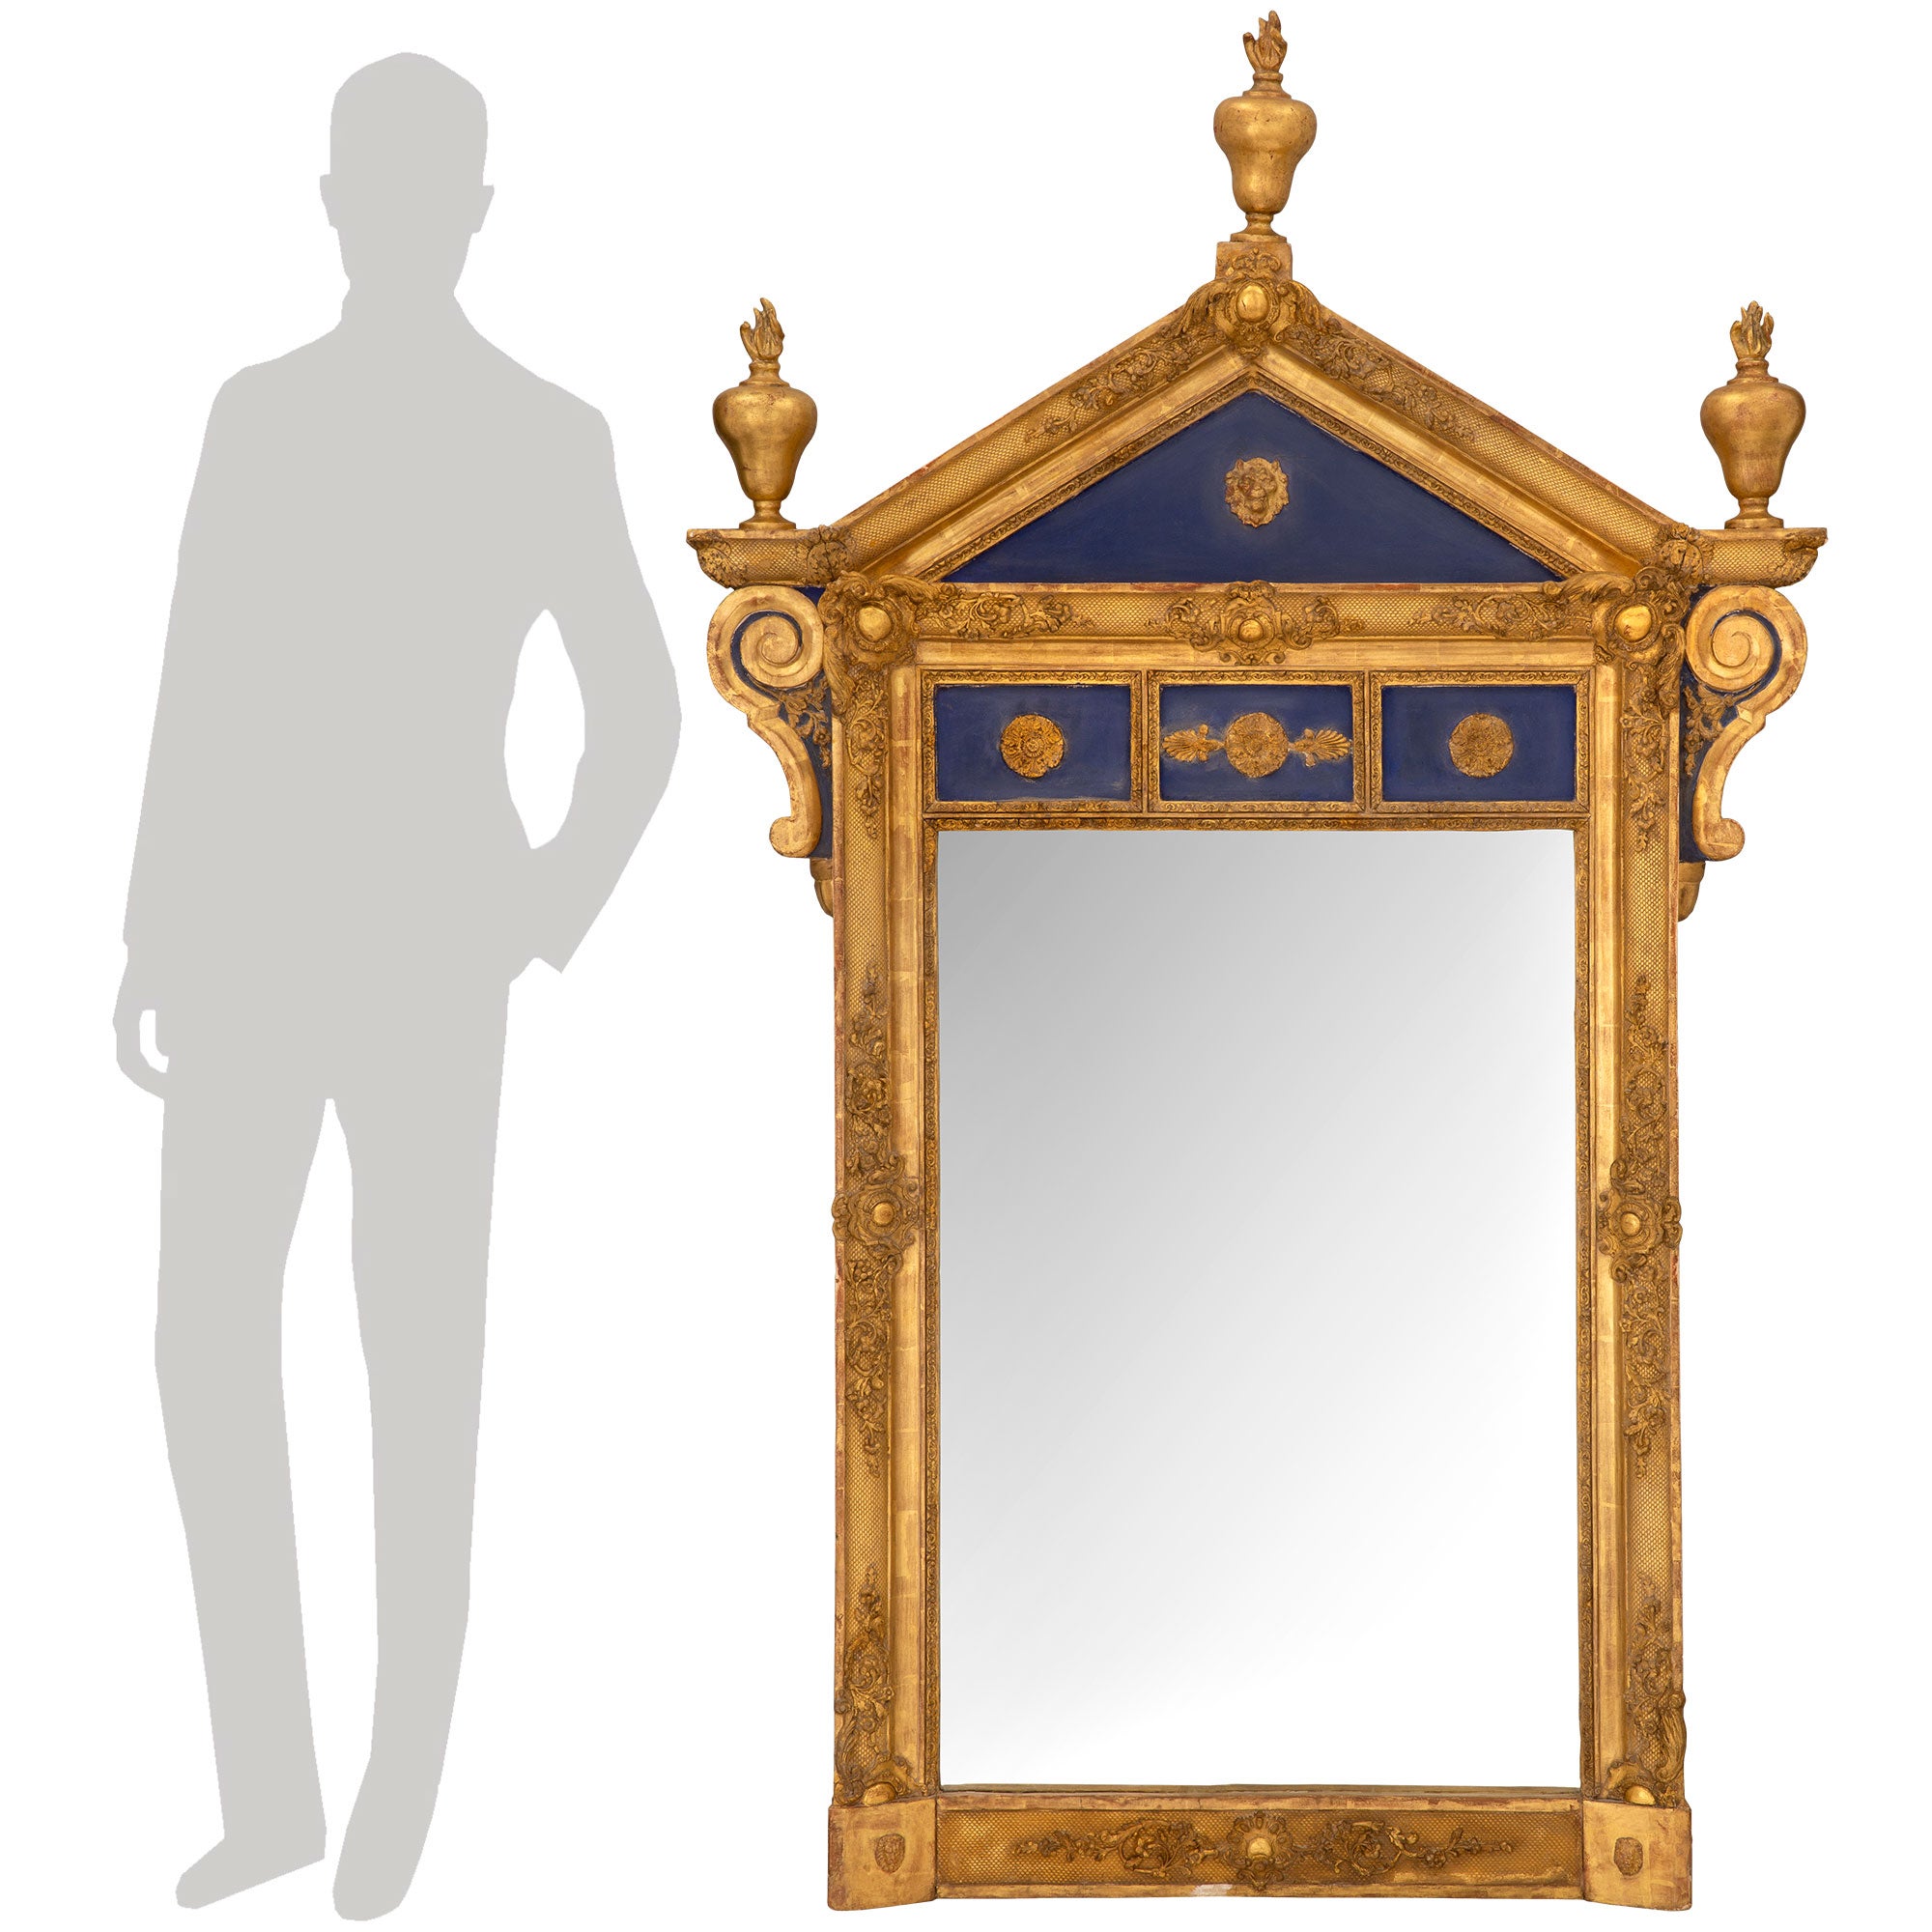 An architectural and most elegant Italian 19th century neo-classical st. giltwood and patinated cobalt blue mirror. The original mirror plate is set within a beautiful thick mottled border decorated with charming richly carved cabochon reserves at